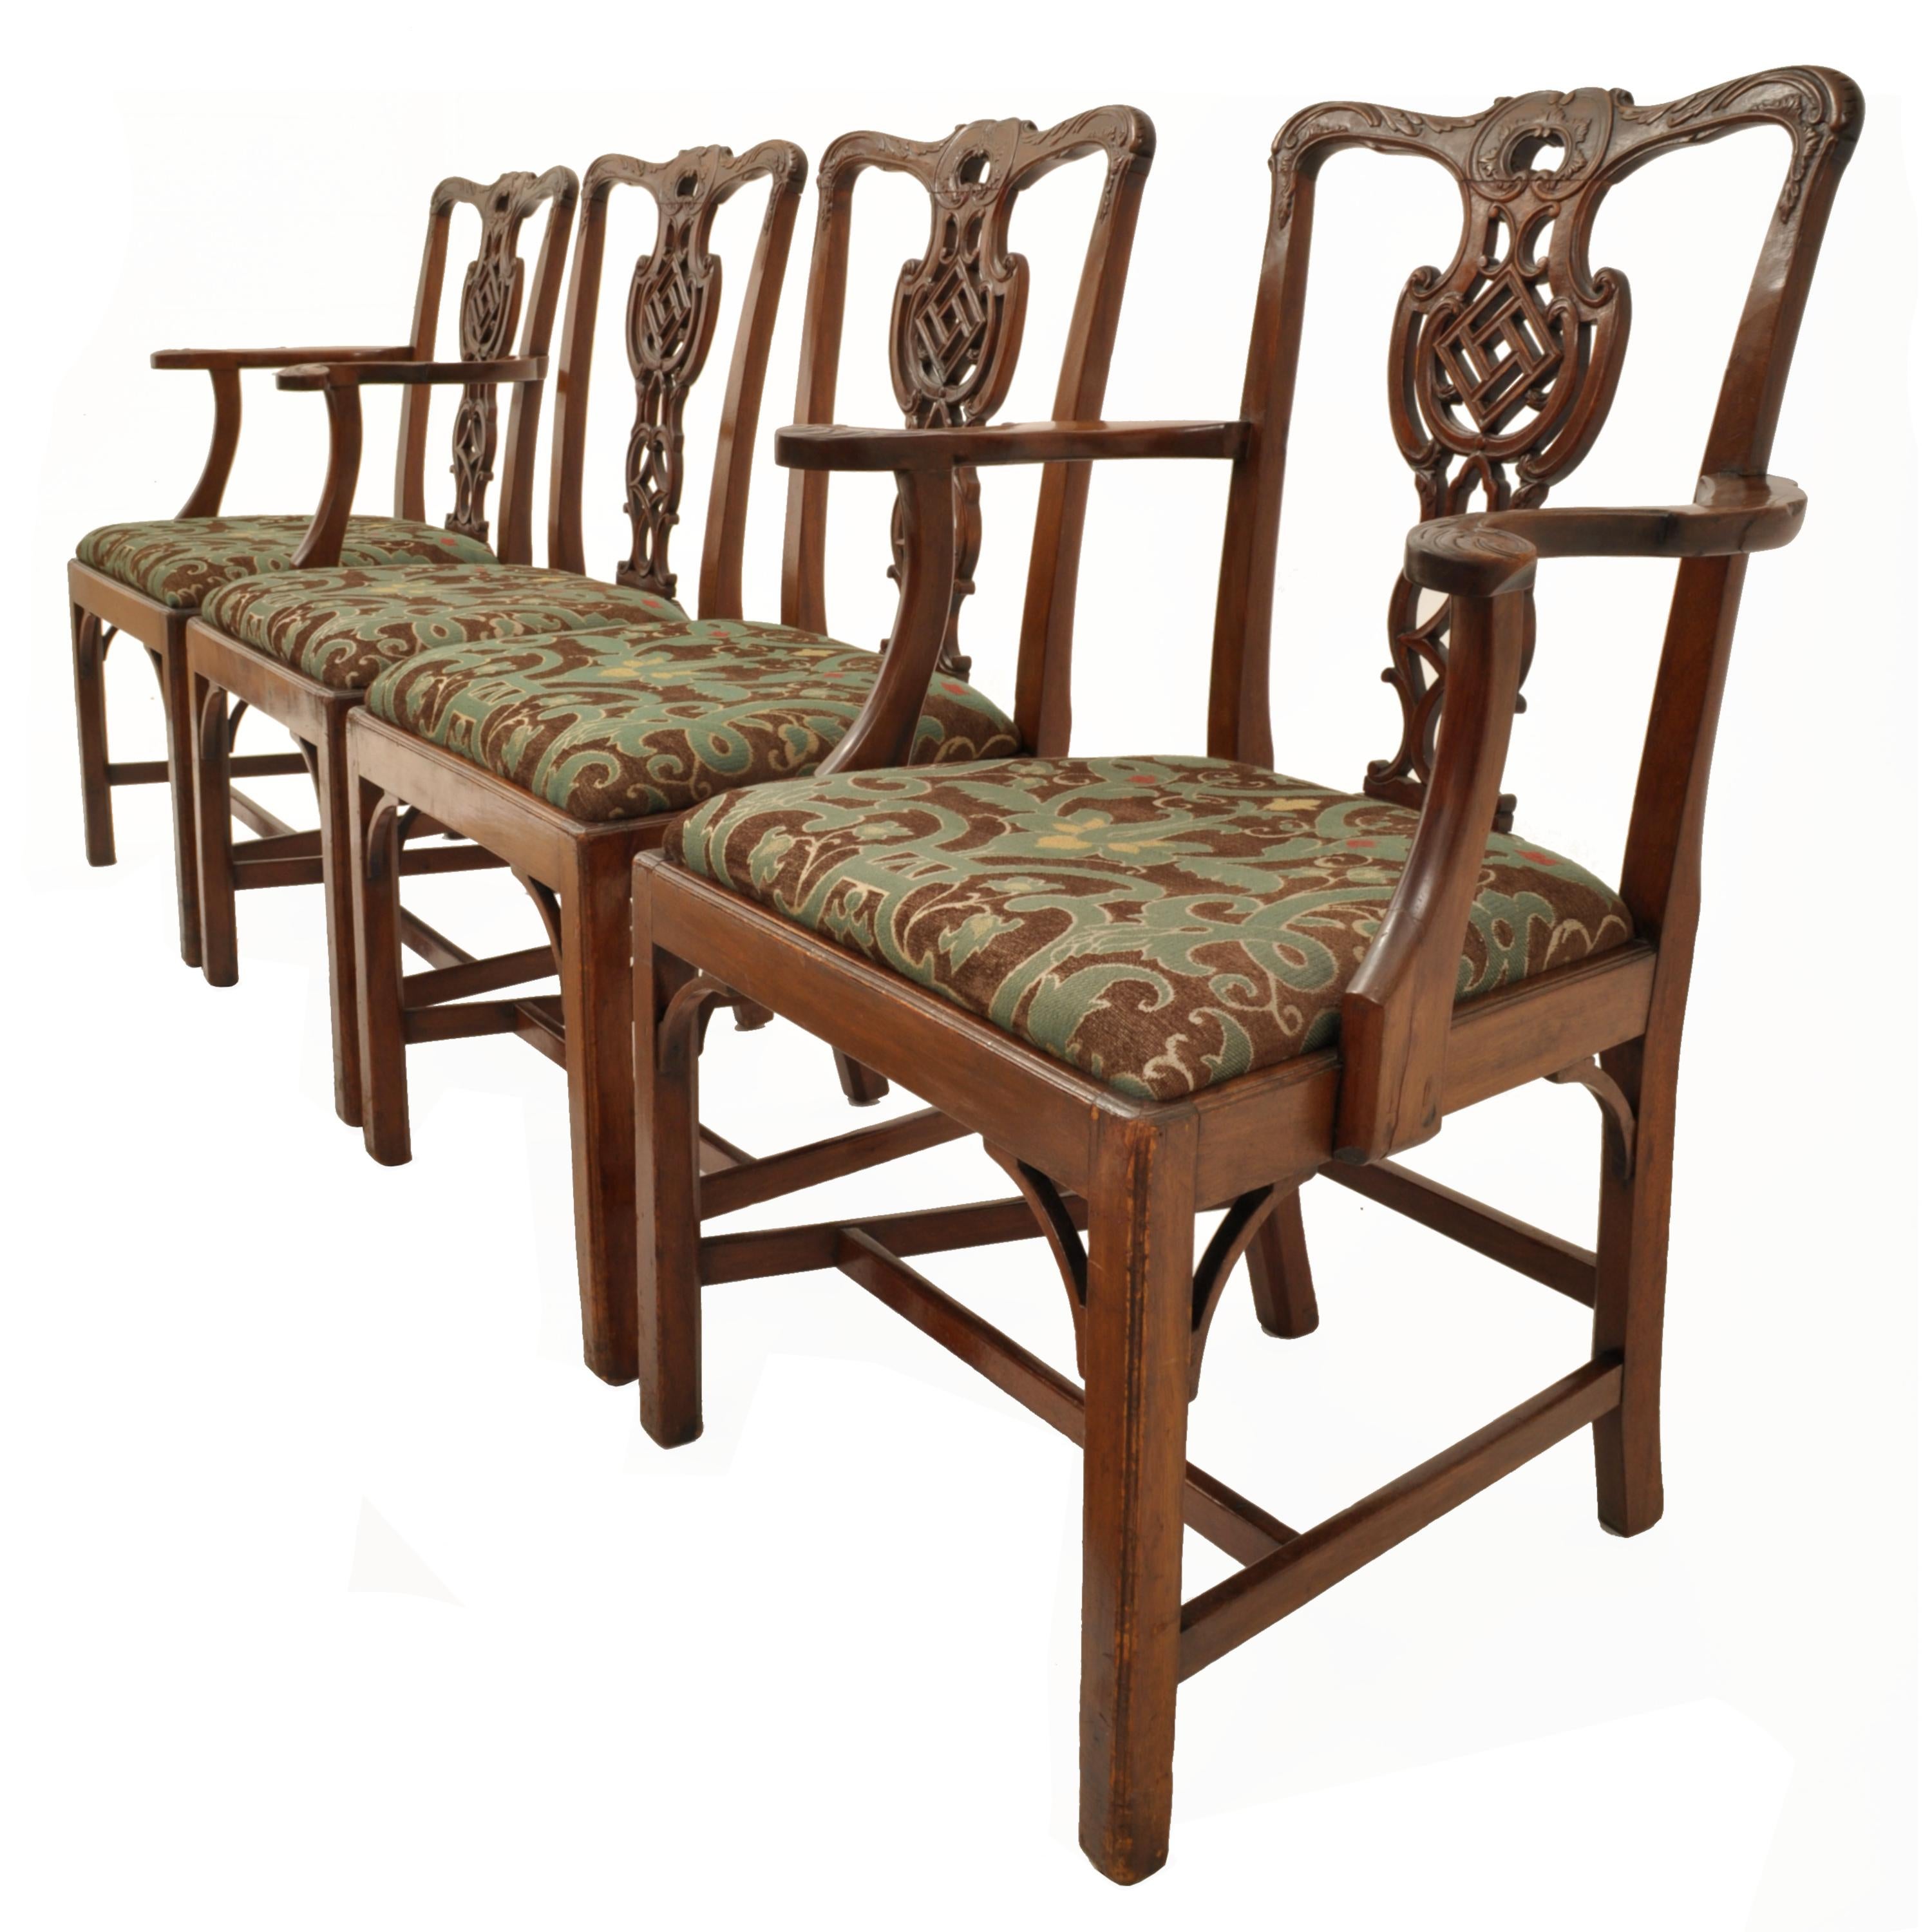 English Antique 19th Century Set of Four Carved Mahogany Chippendale Dining Chairs 1890 For Sale